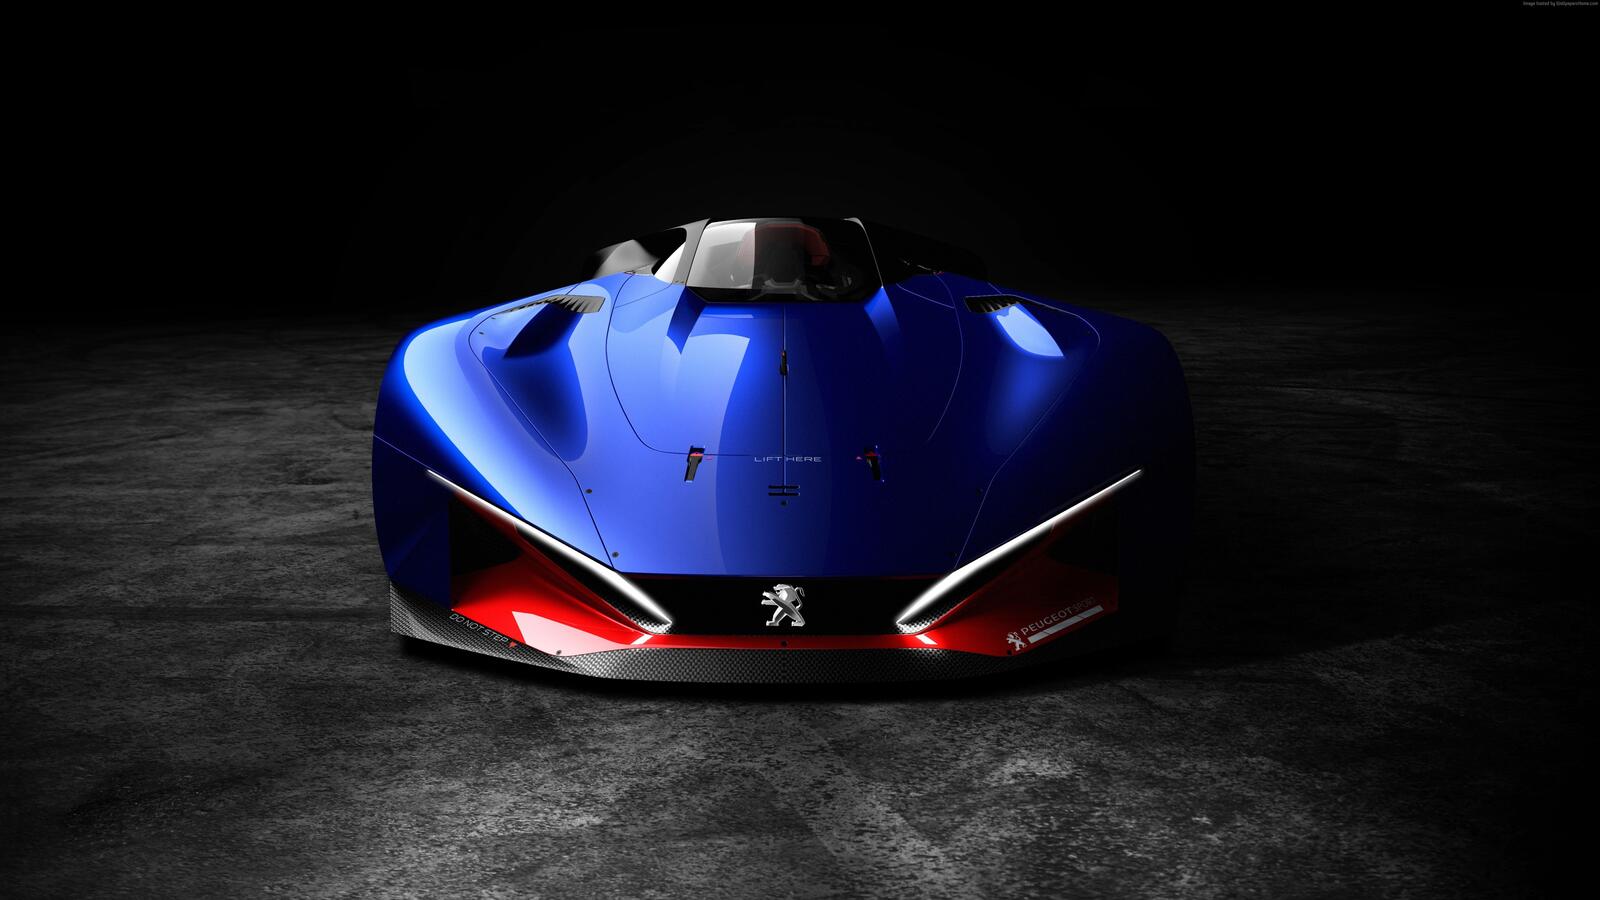 Wallpapers Peugeot Cars concept on the desktop